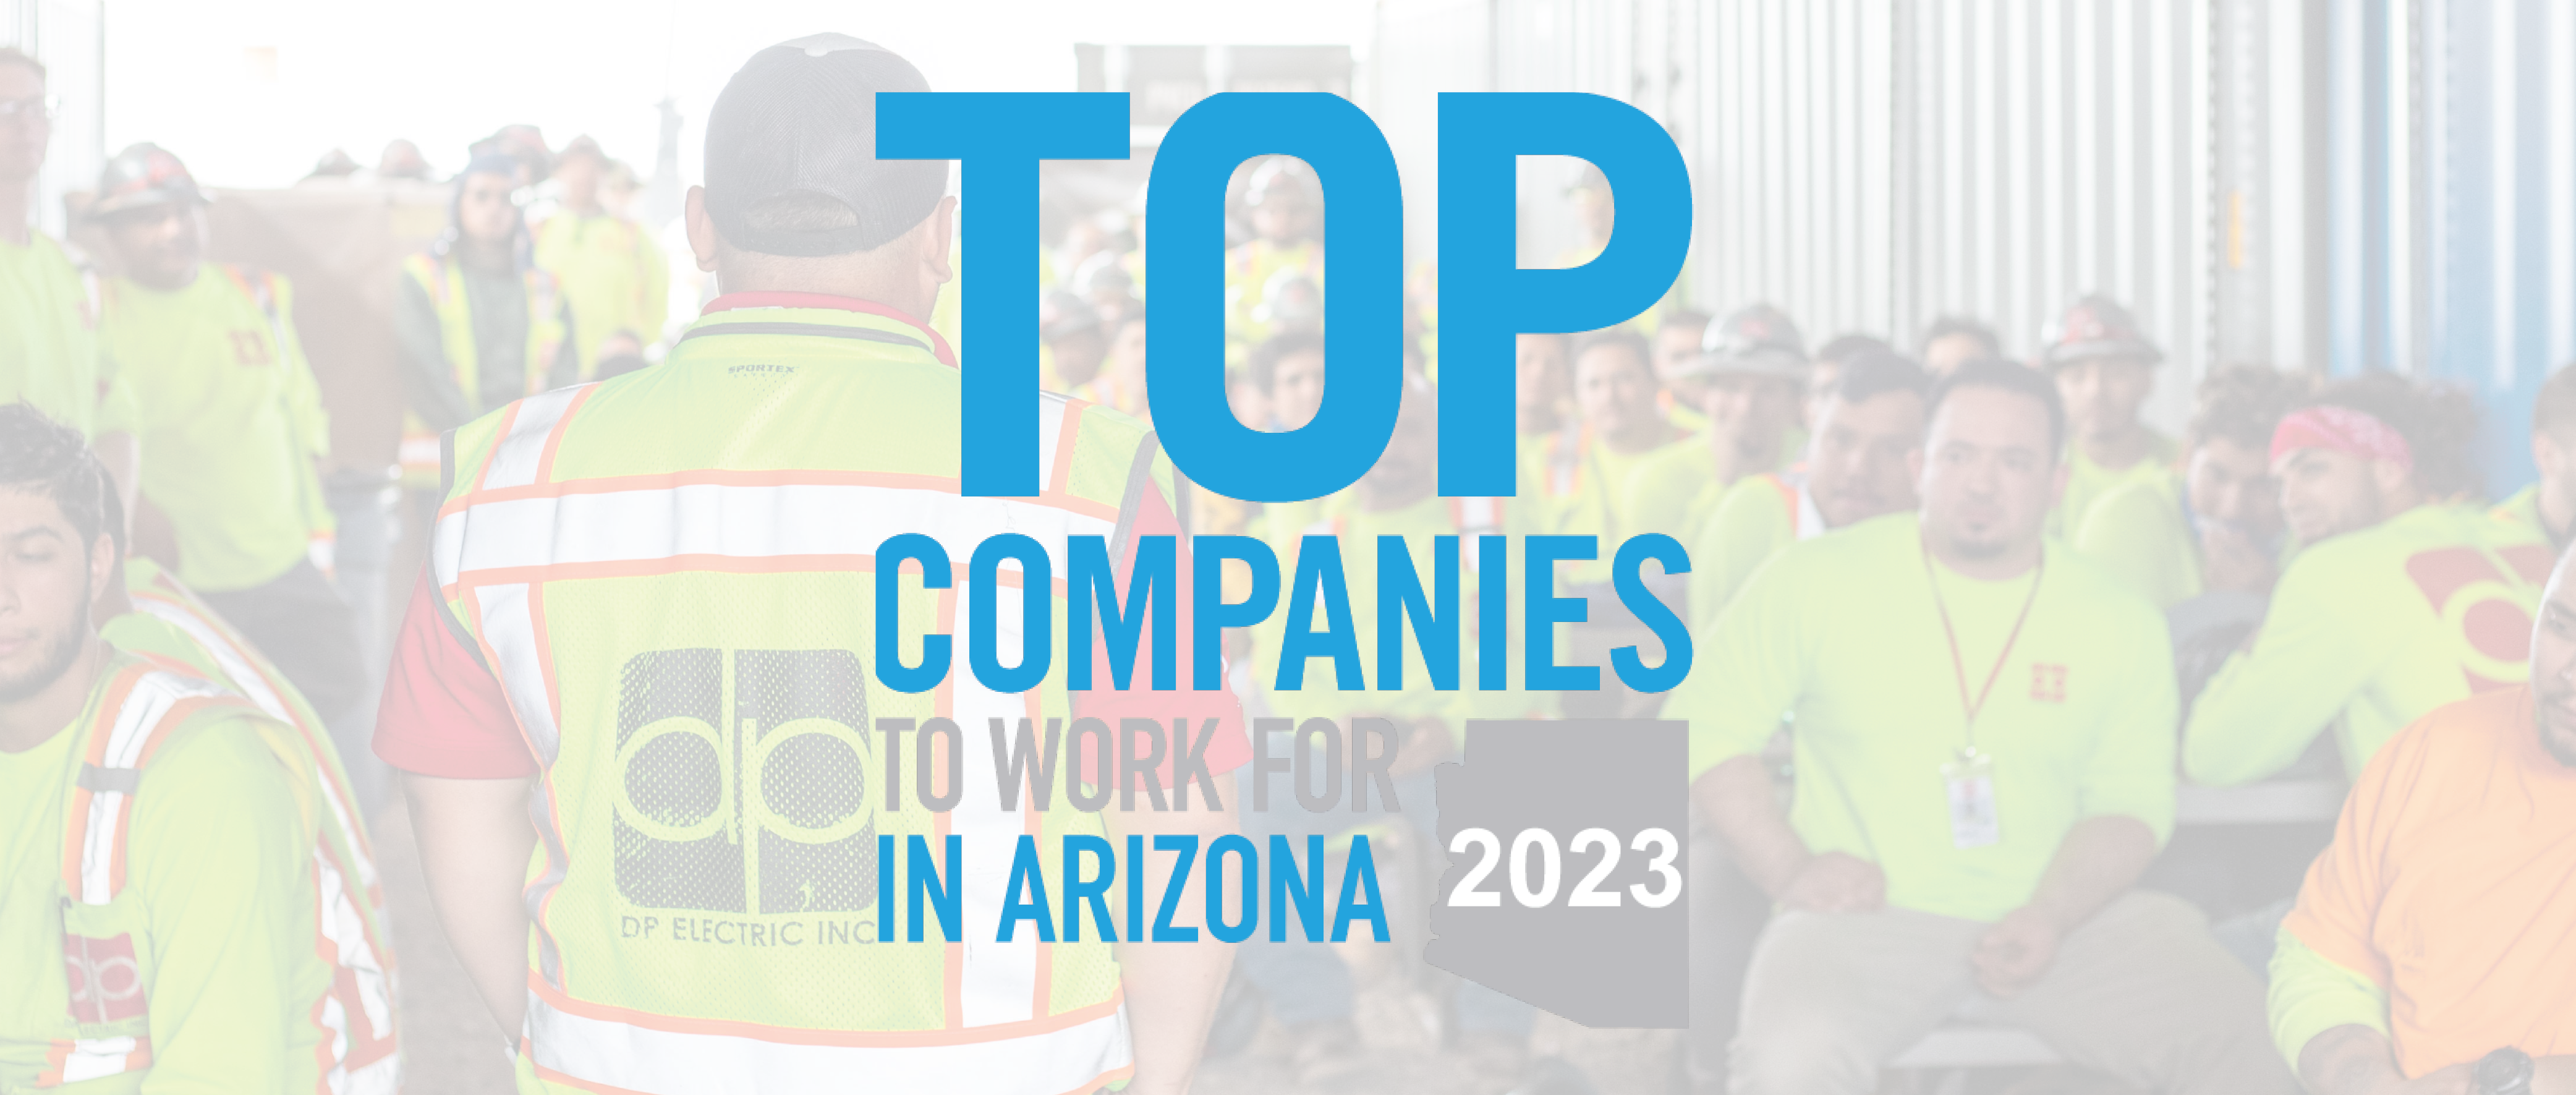 Top companies to work for in arizona 2020.